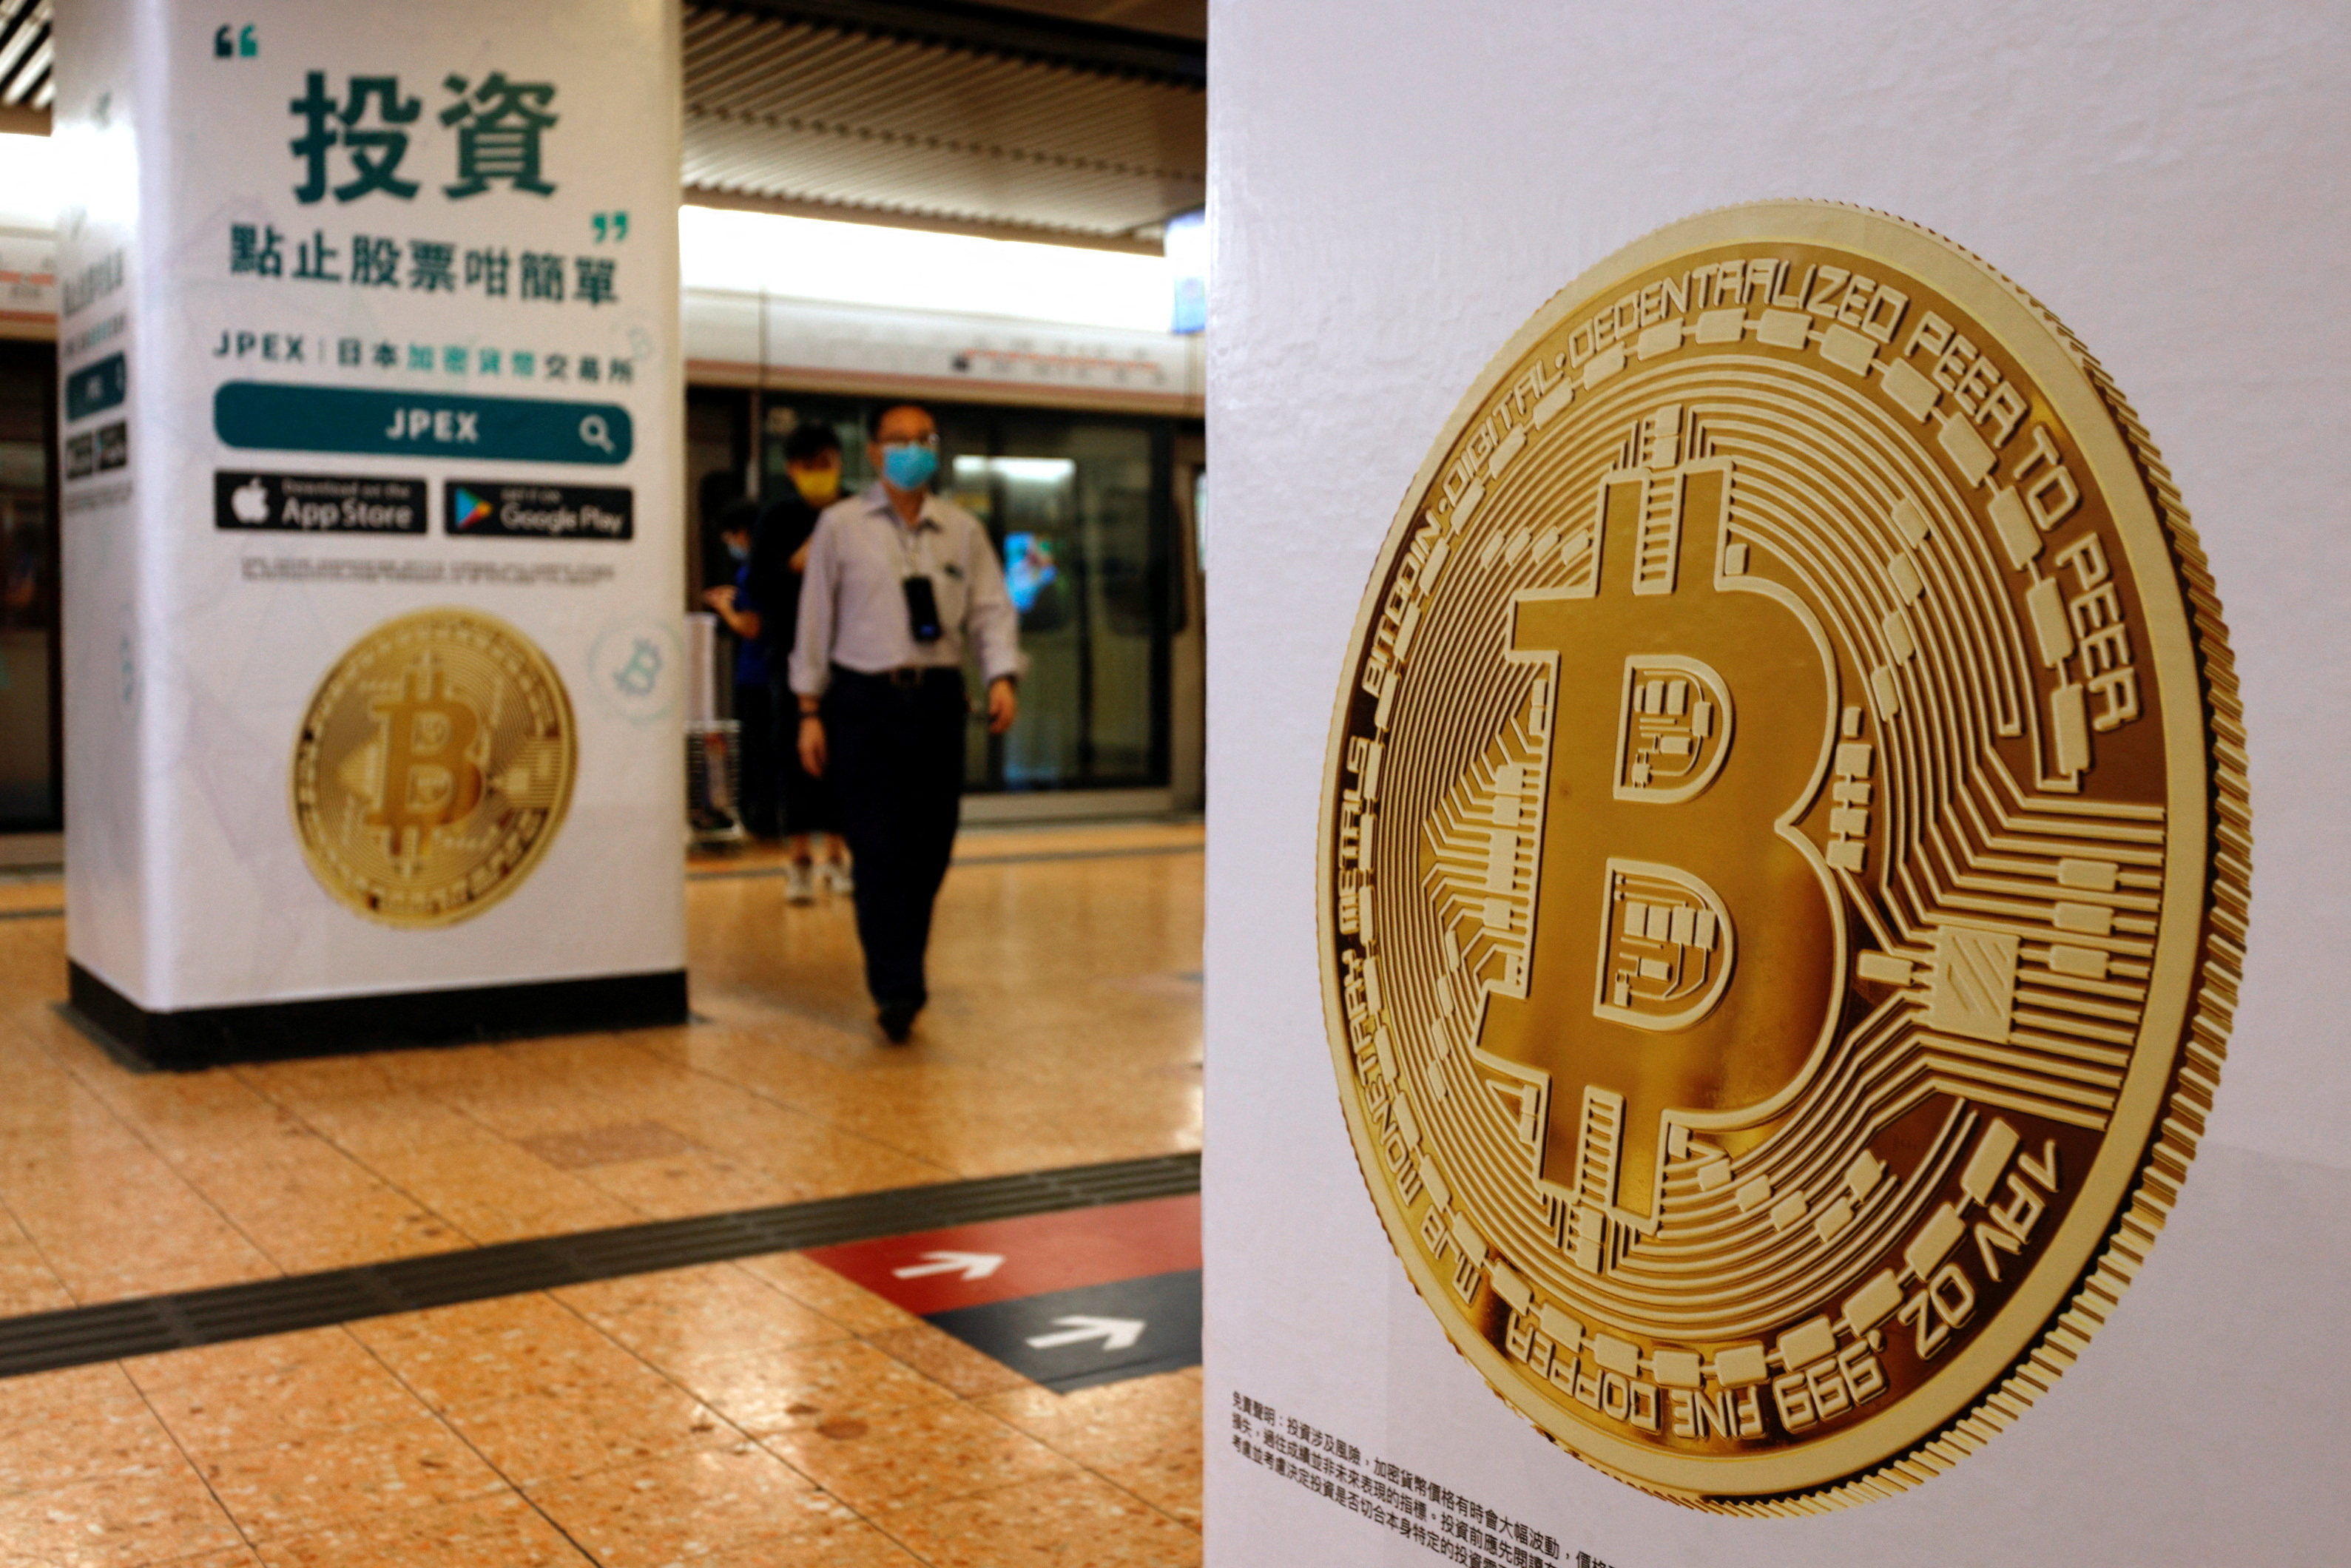 Advertisements for crypto exchange in Hong Kong. Asia’s financial hubs Hong Kong and Singapore are well-positioned to emerge as new centres of the global cryptocurrency system following a crackdown on companies in the US. Photo: Reuters